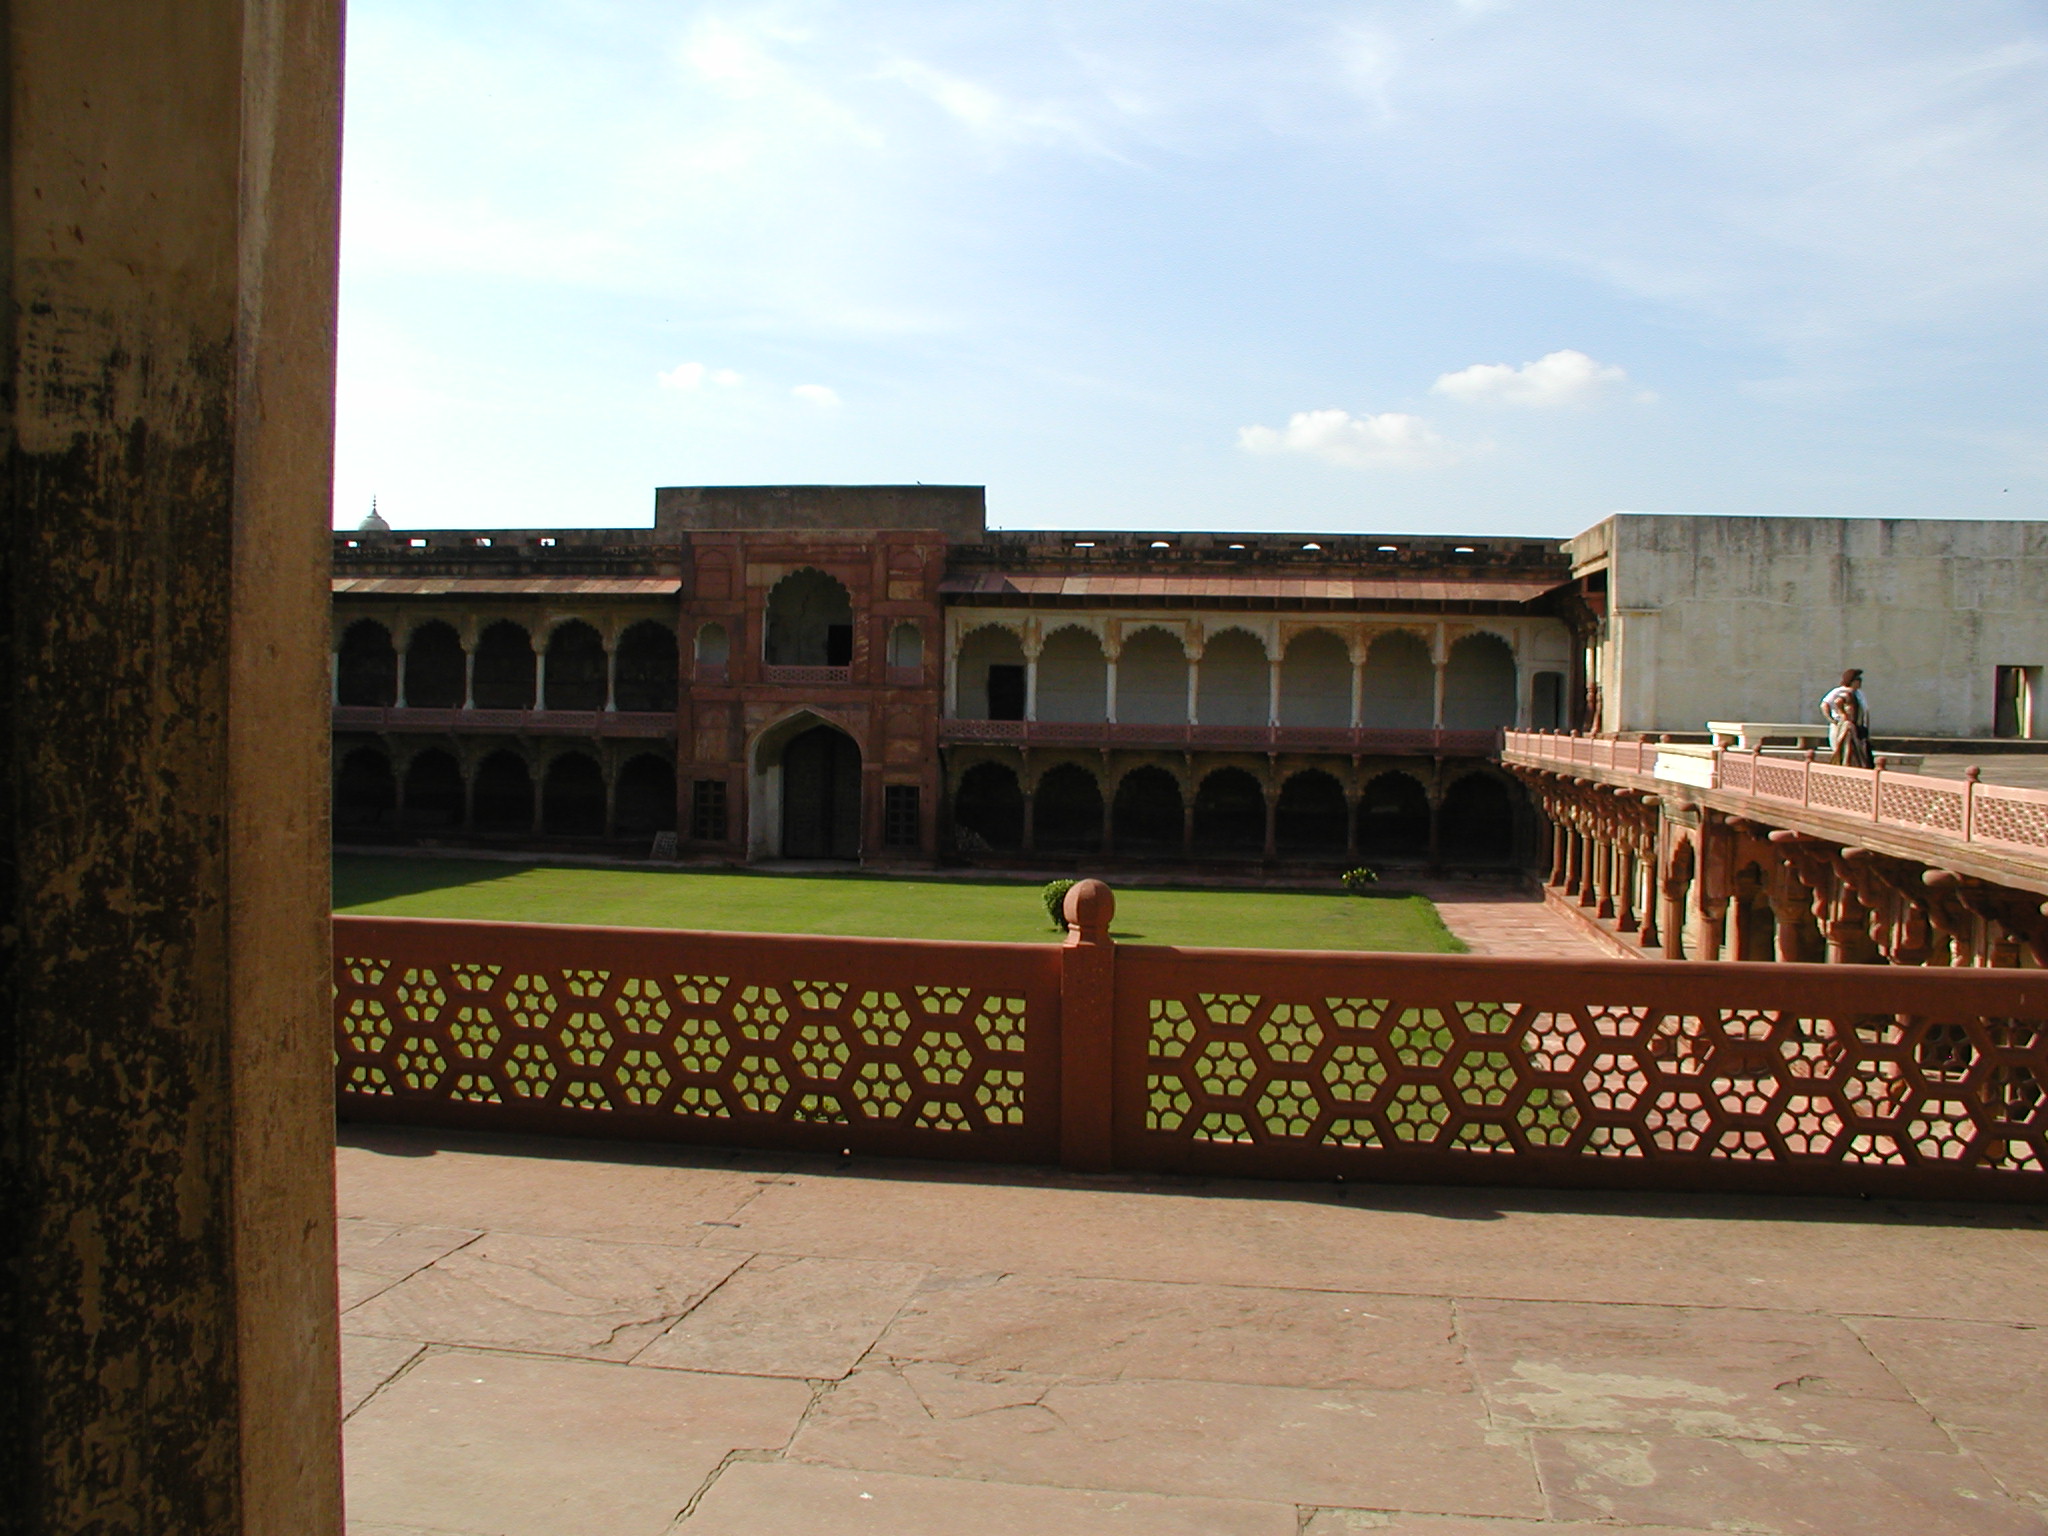 The courtyard in the for of Agra